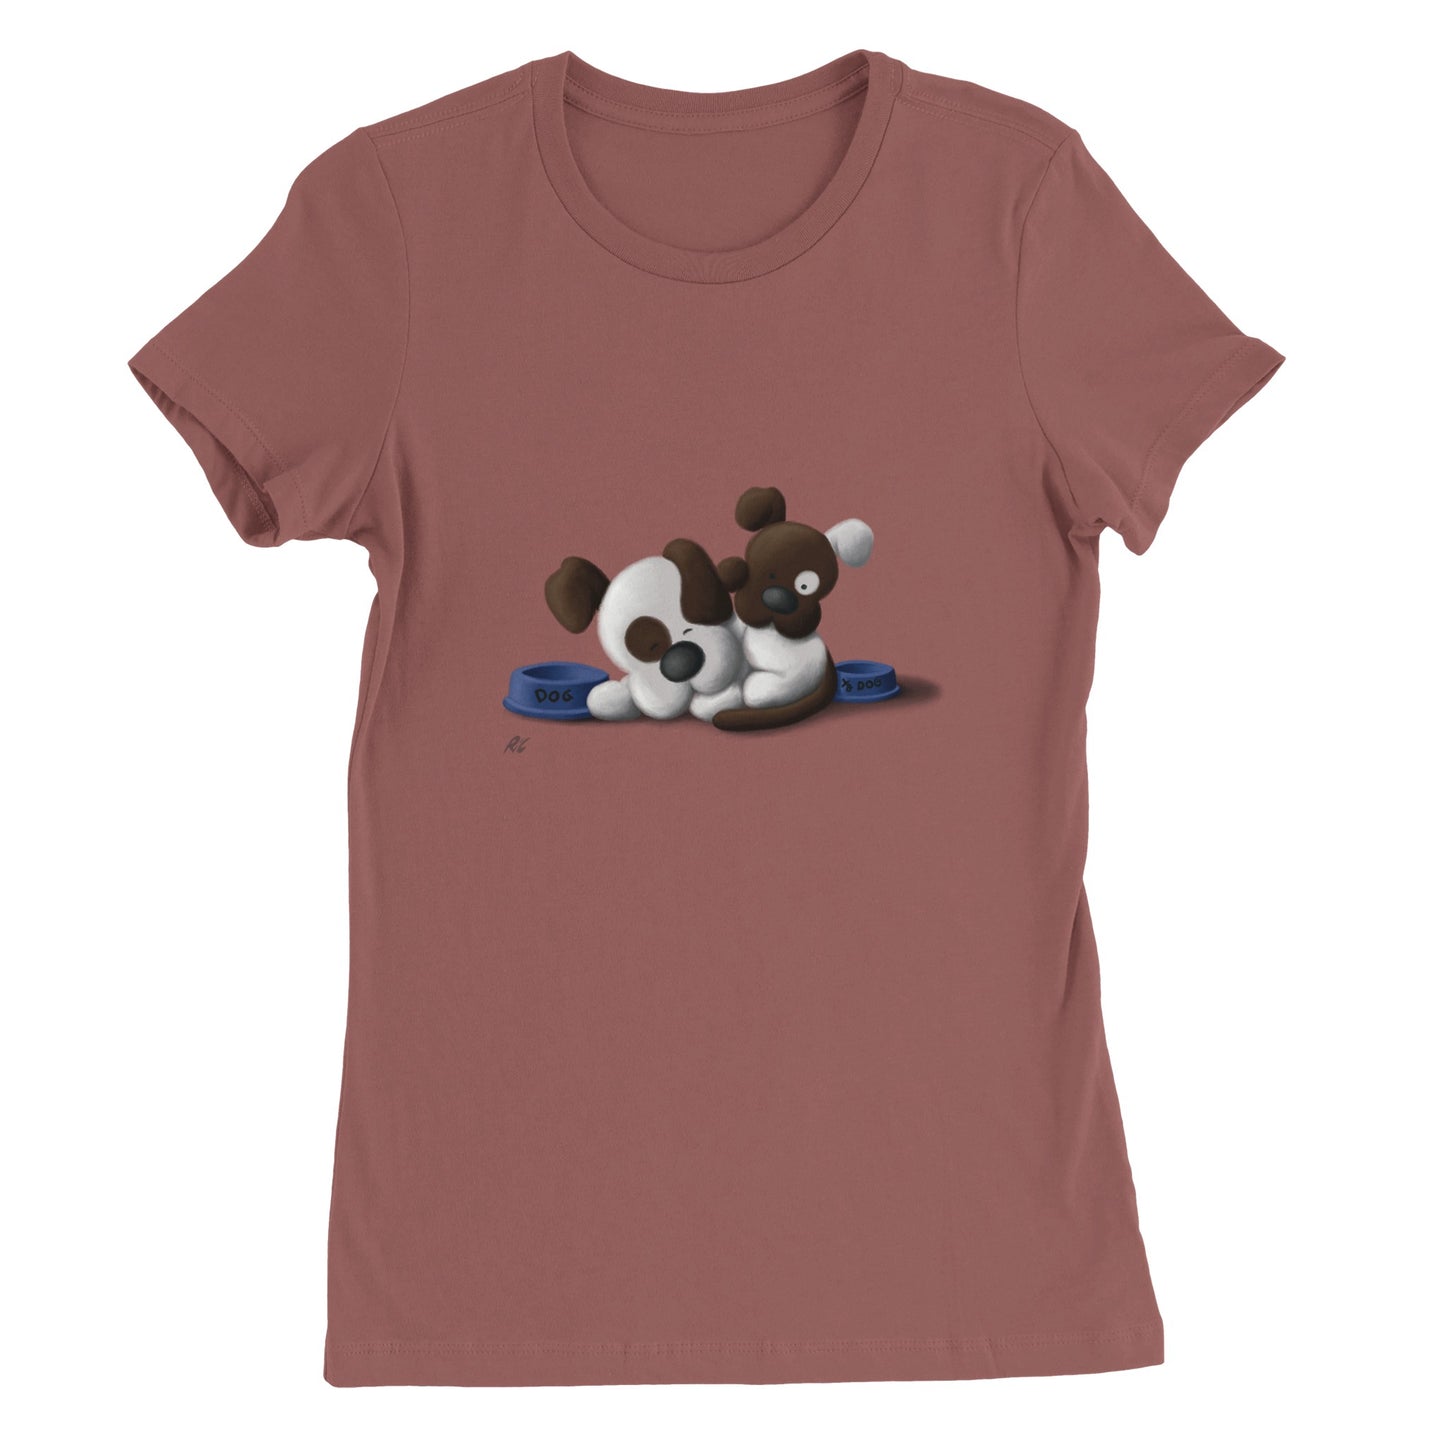 "Wake up Dad, it's time for Dinner!" - Premium Womens Crewneck T-shirt